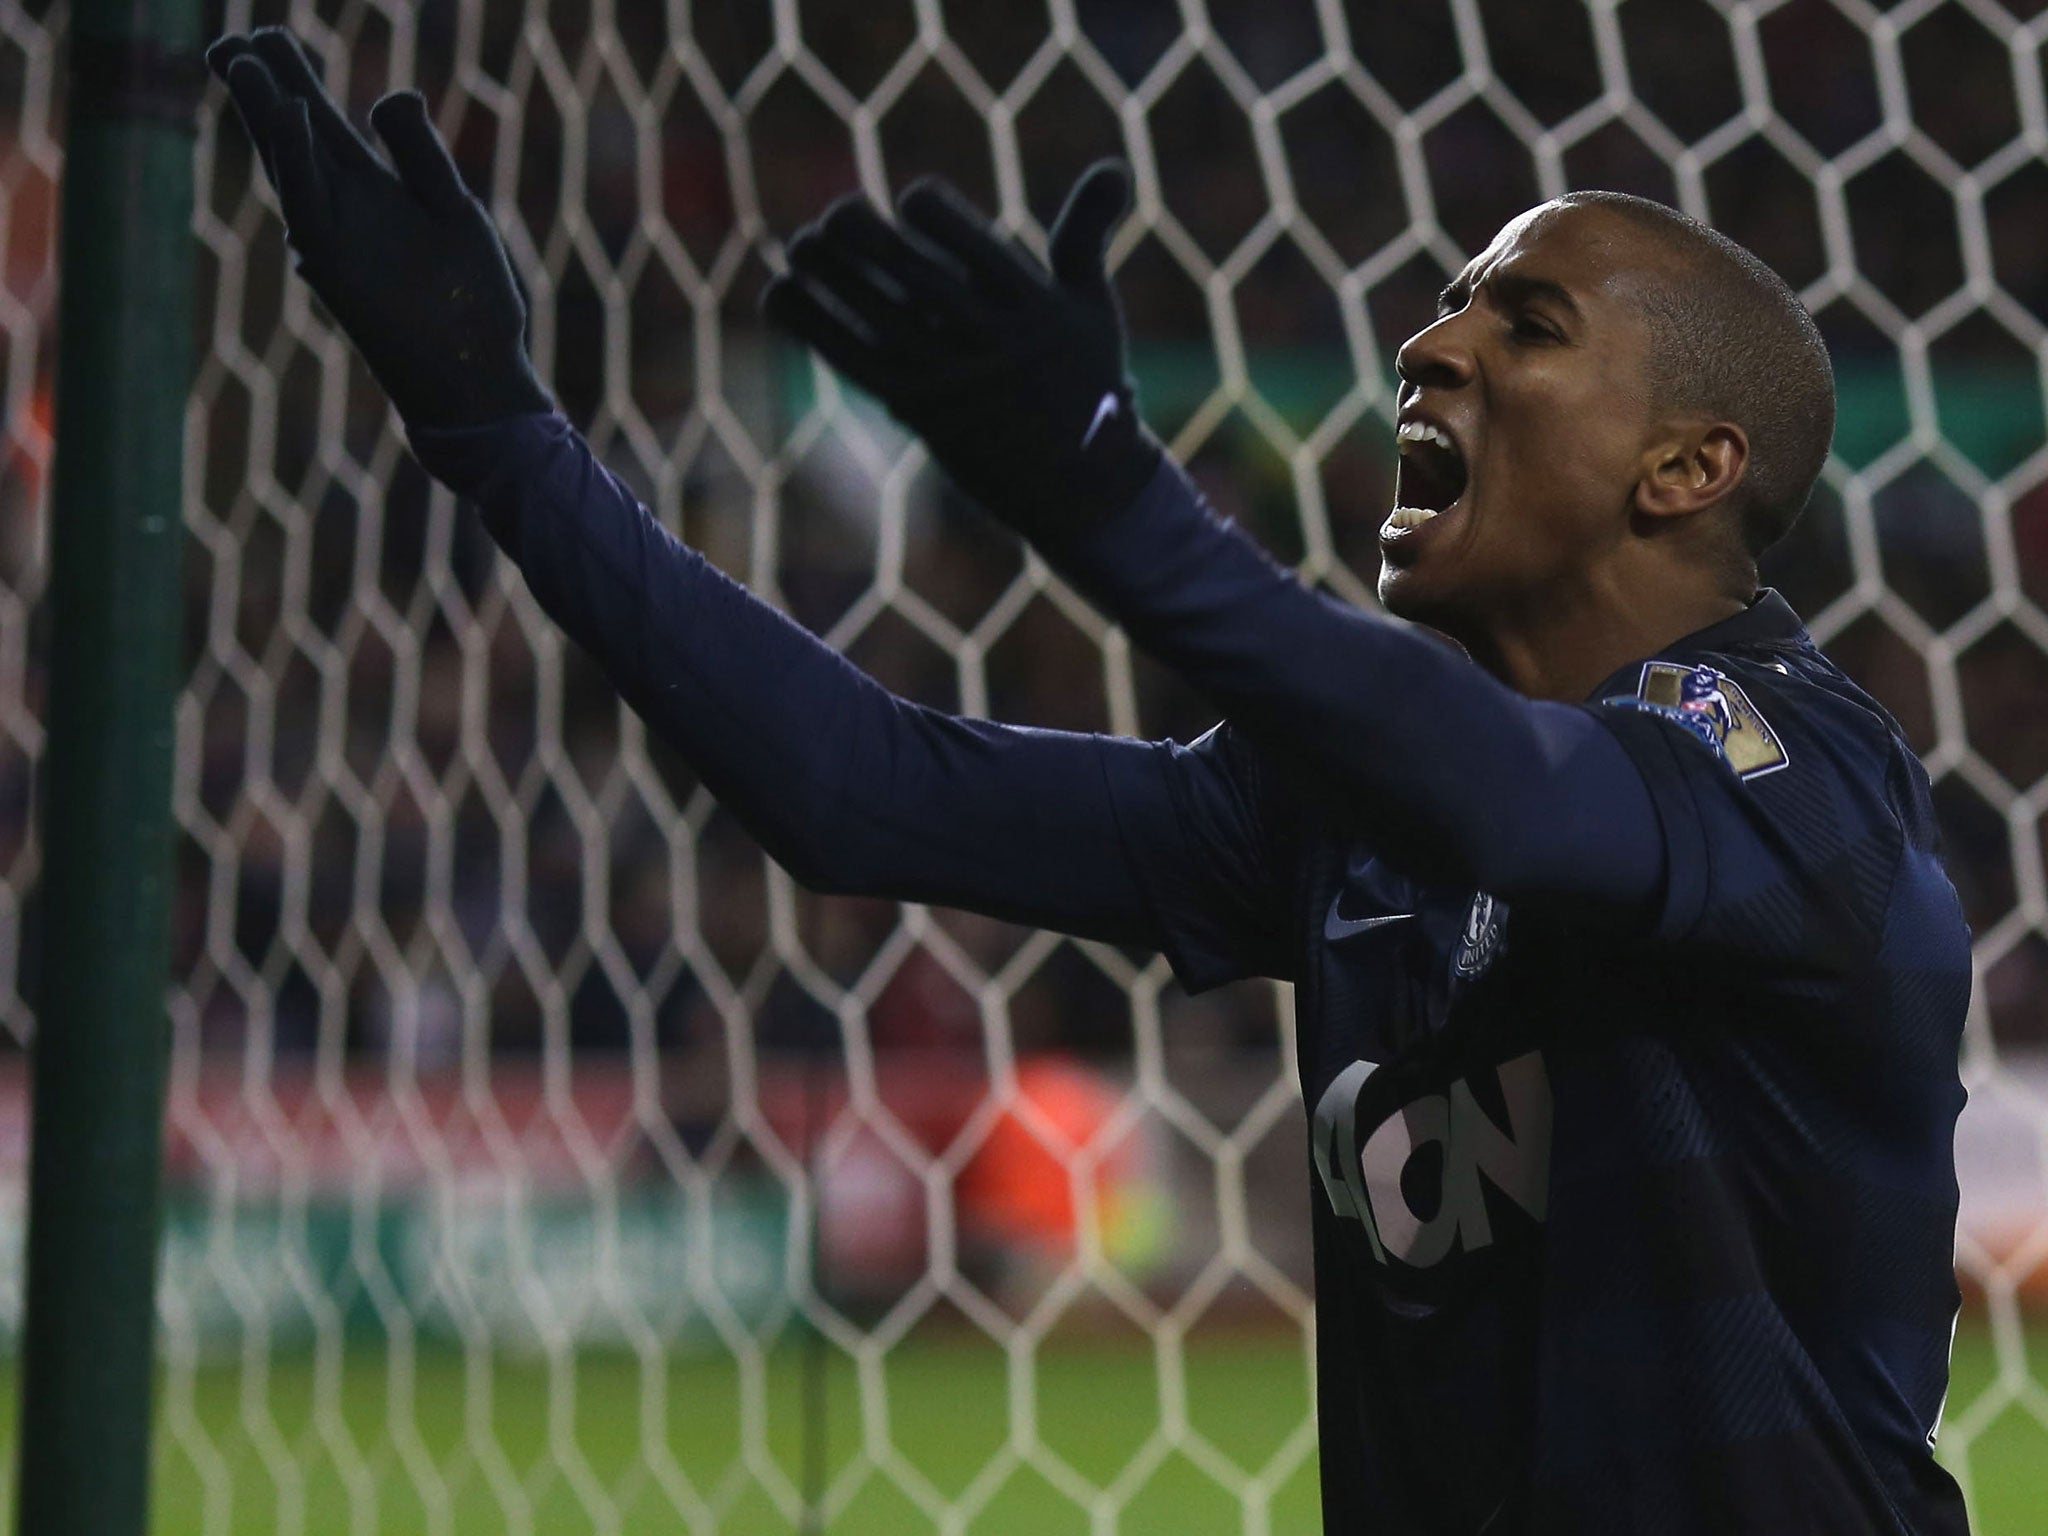 Manchester United winger Ashley Young celebrates after scoring in the League Cup quarter-final win over Stoke City